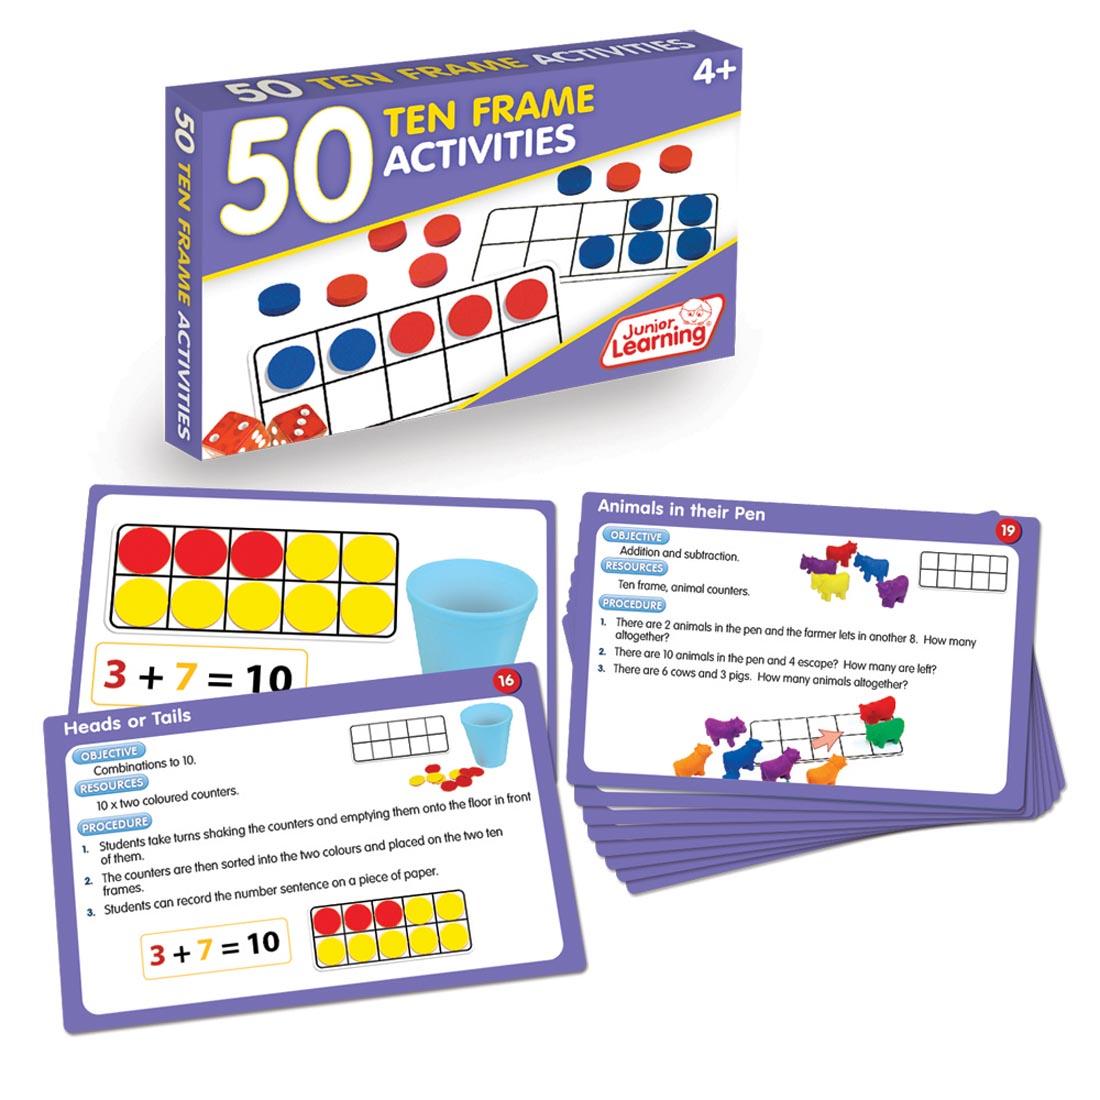 50 Ten Frame Activities by Junior Learning